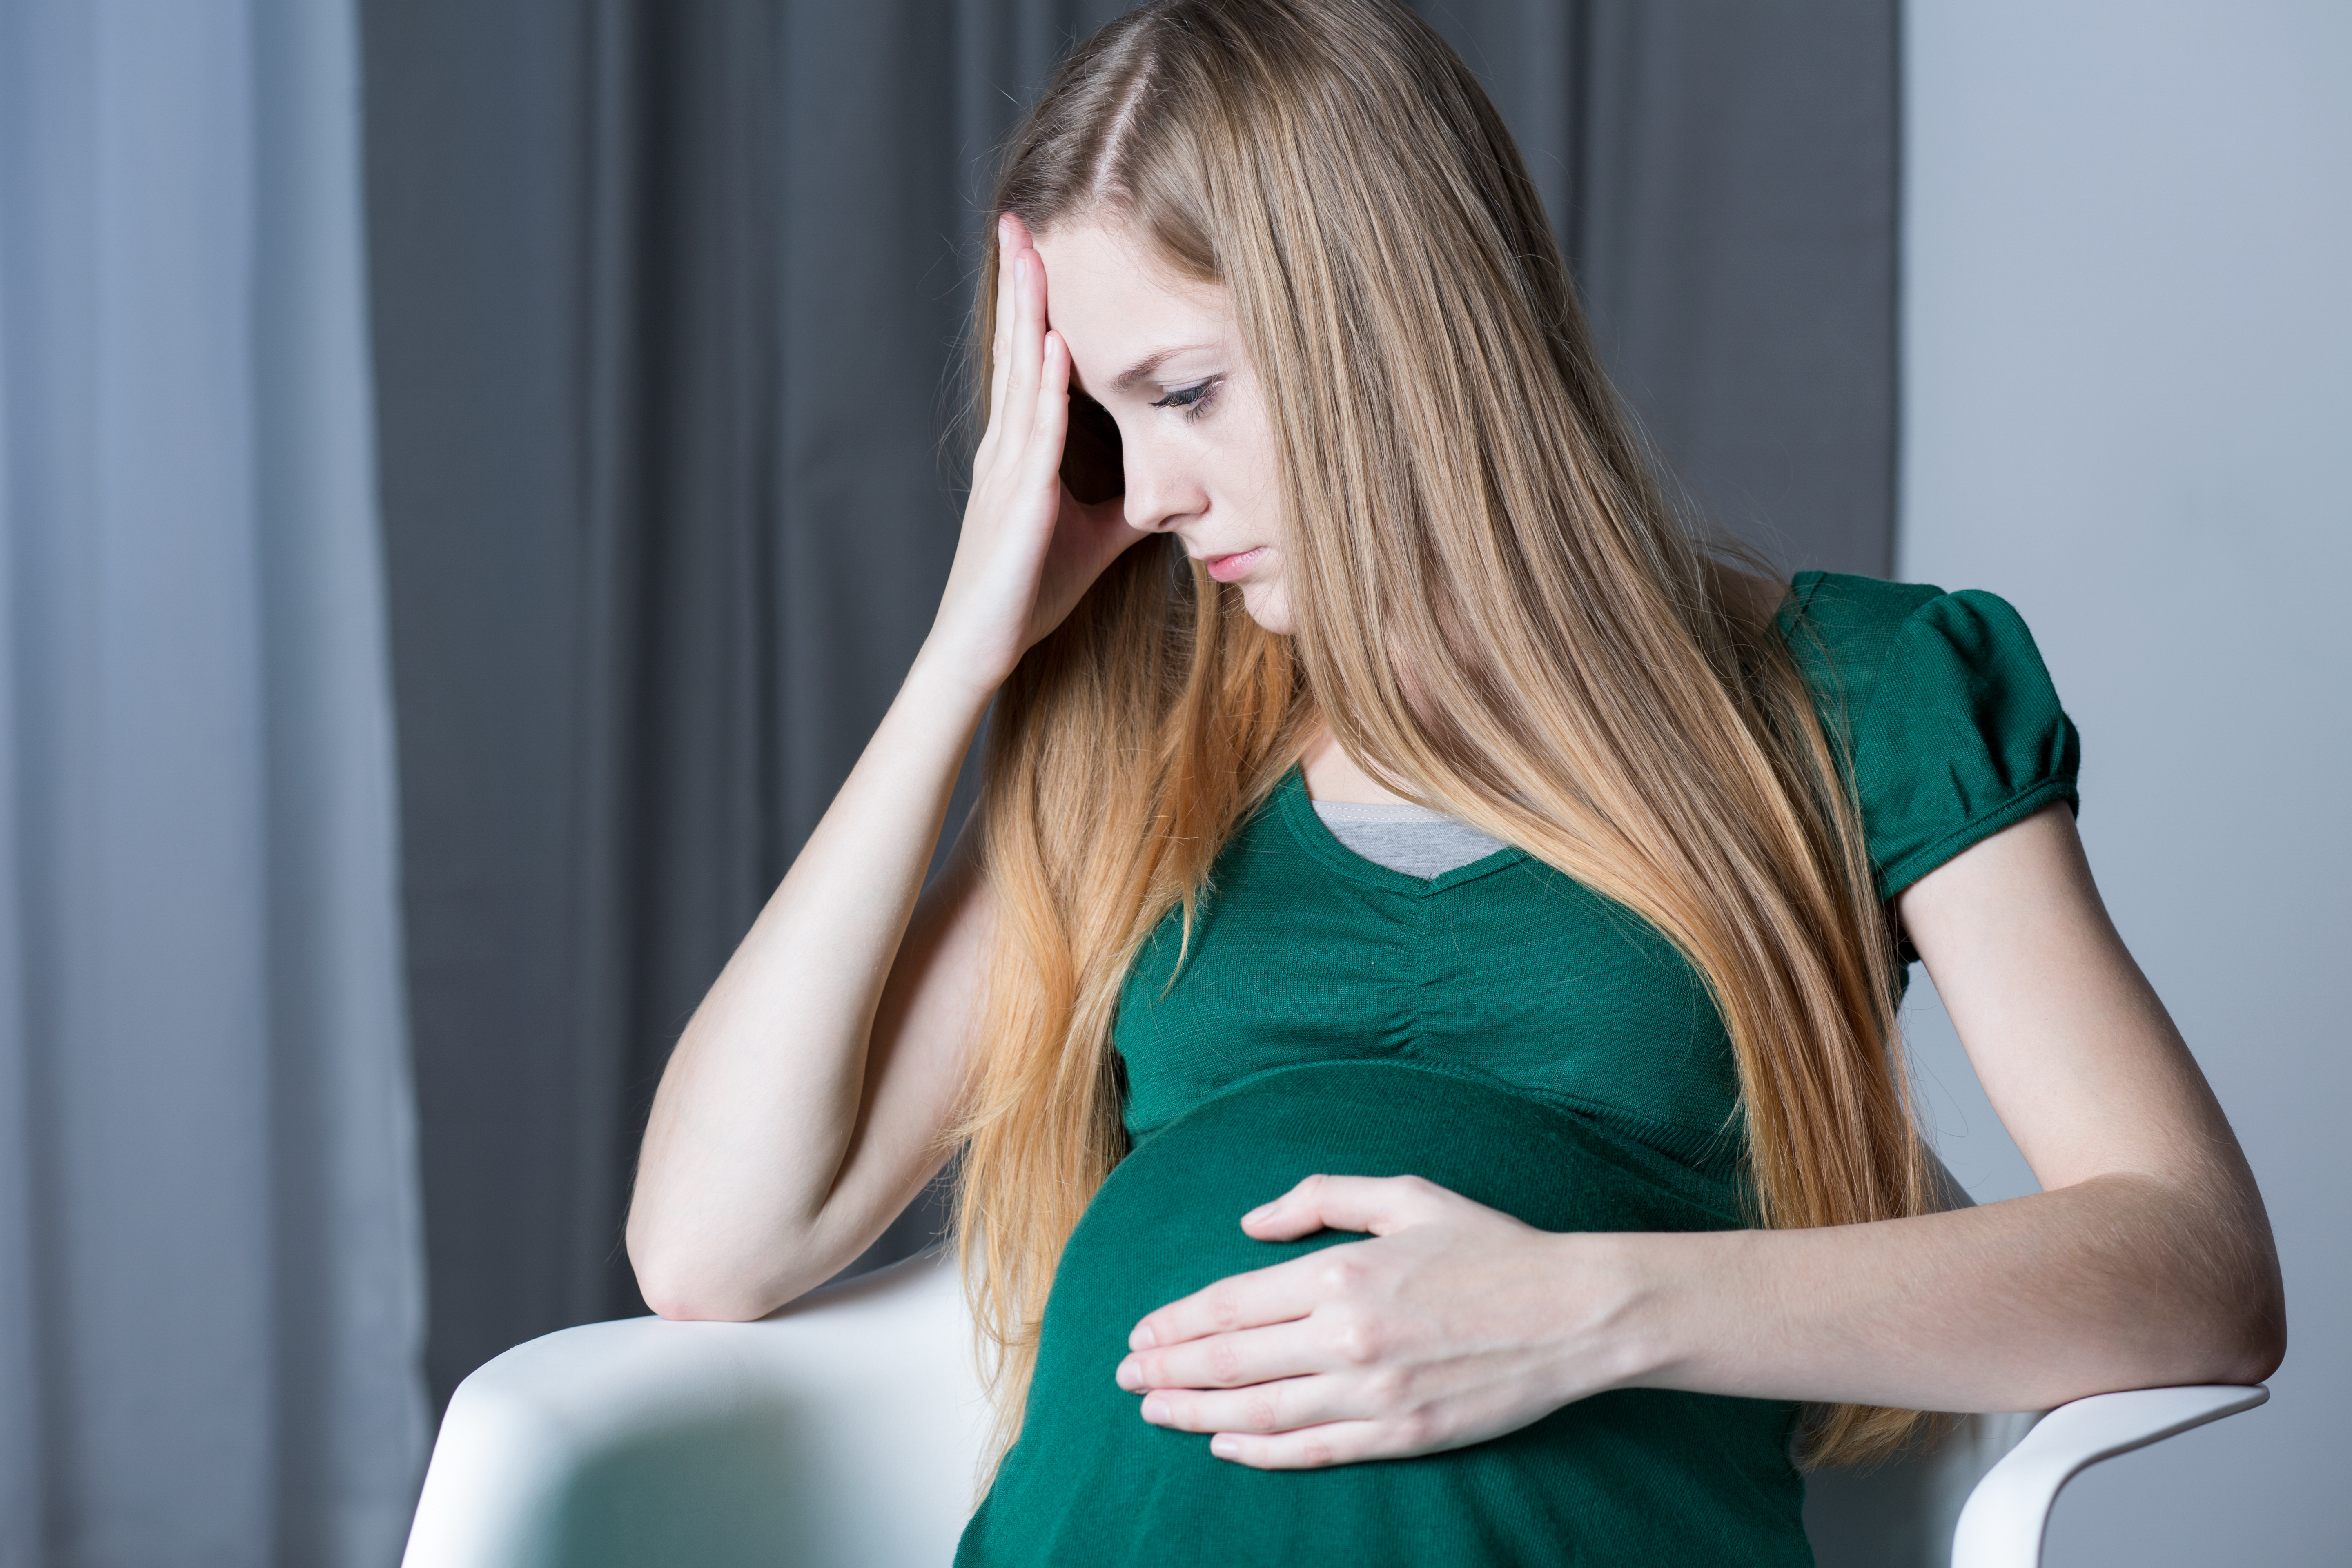 Sad teenager in advanced pregnancy touching with one hand her belly | Source: Shutterstock.com